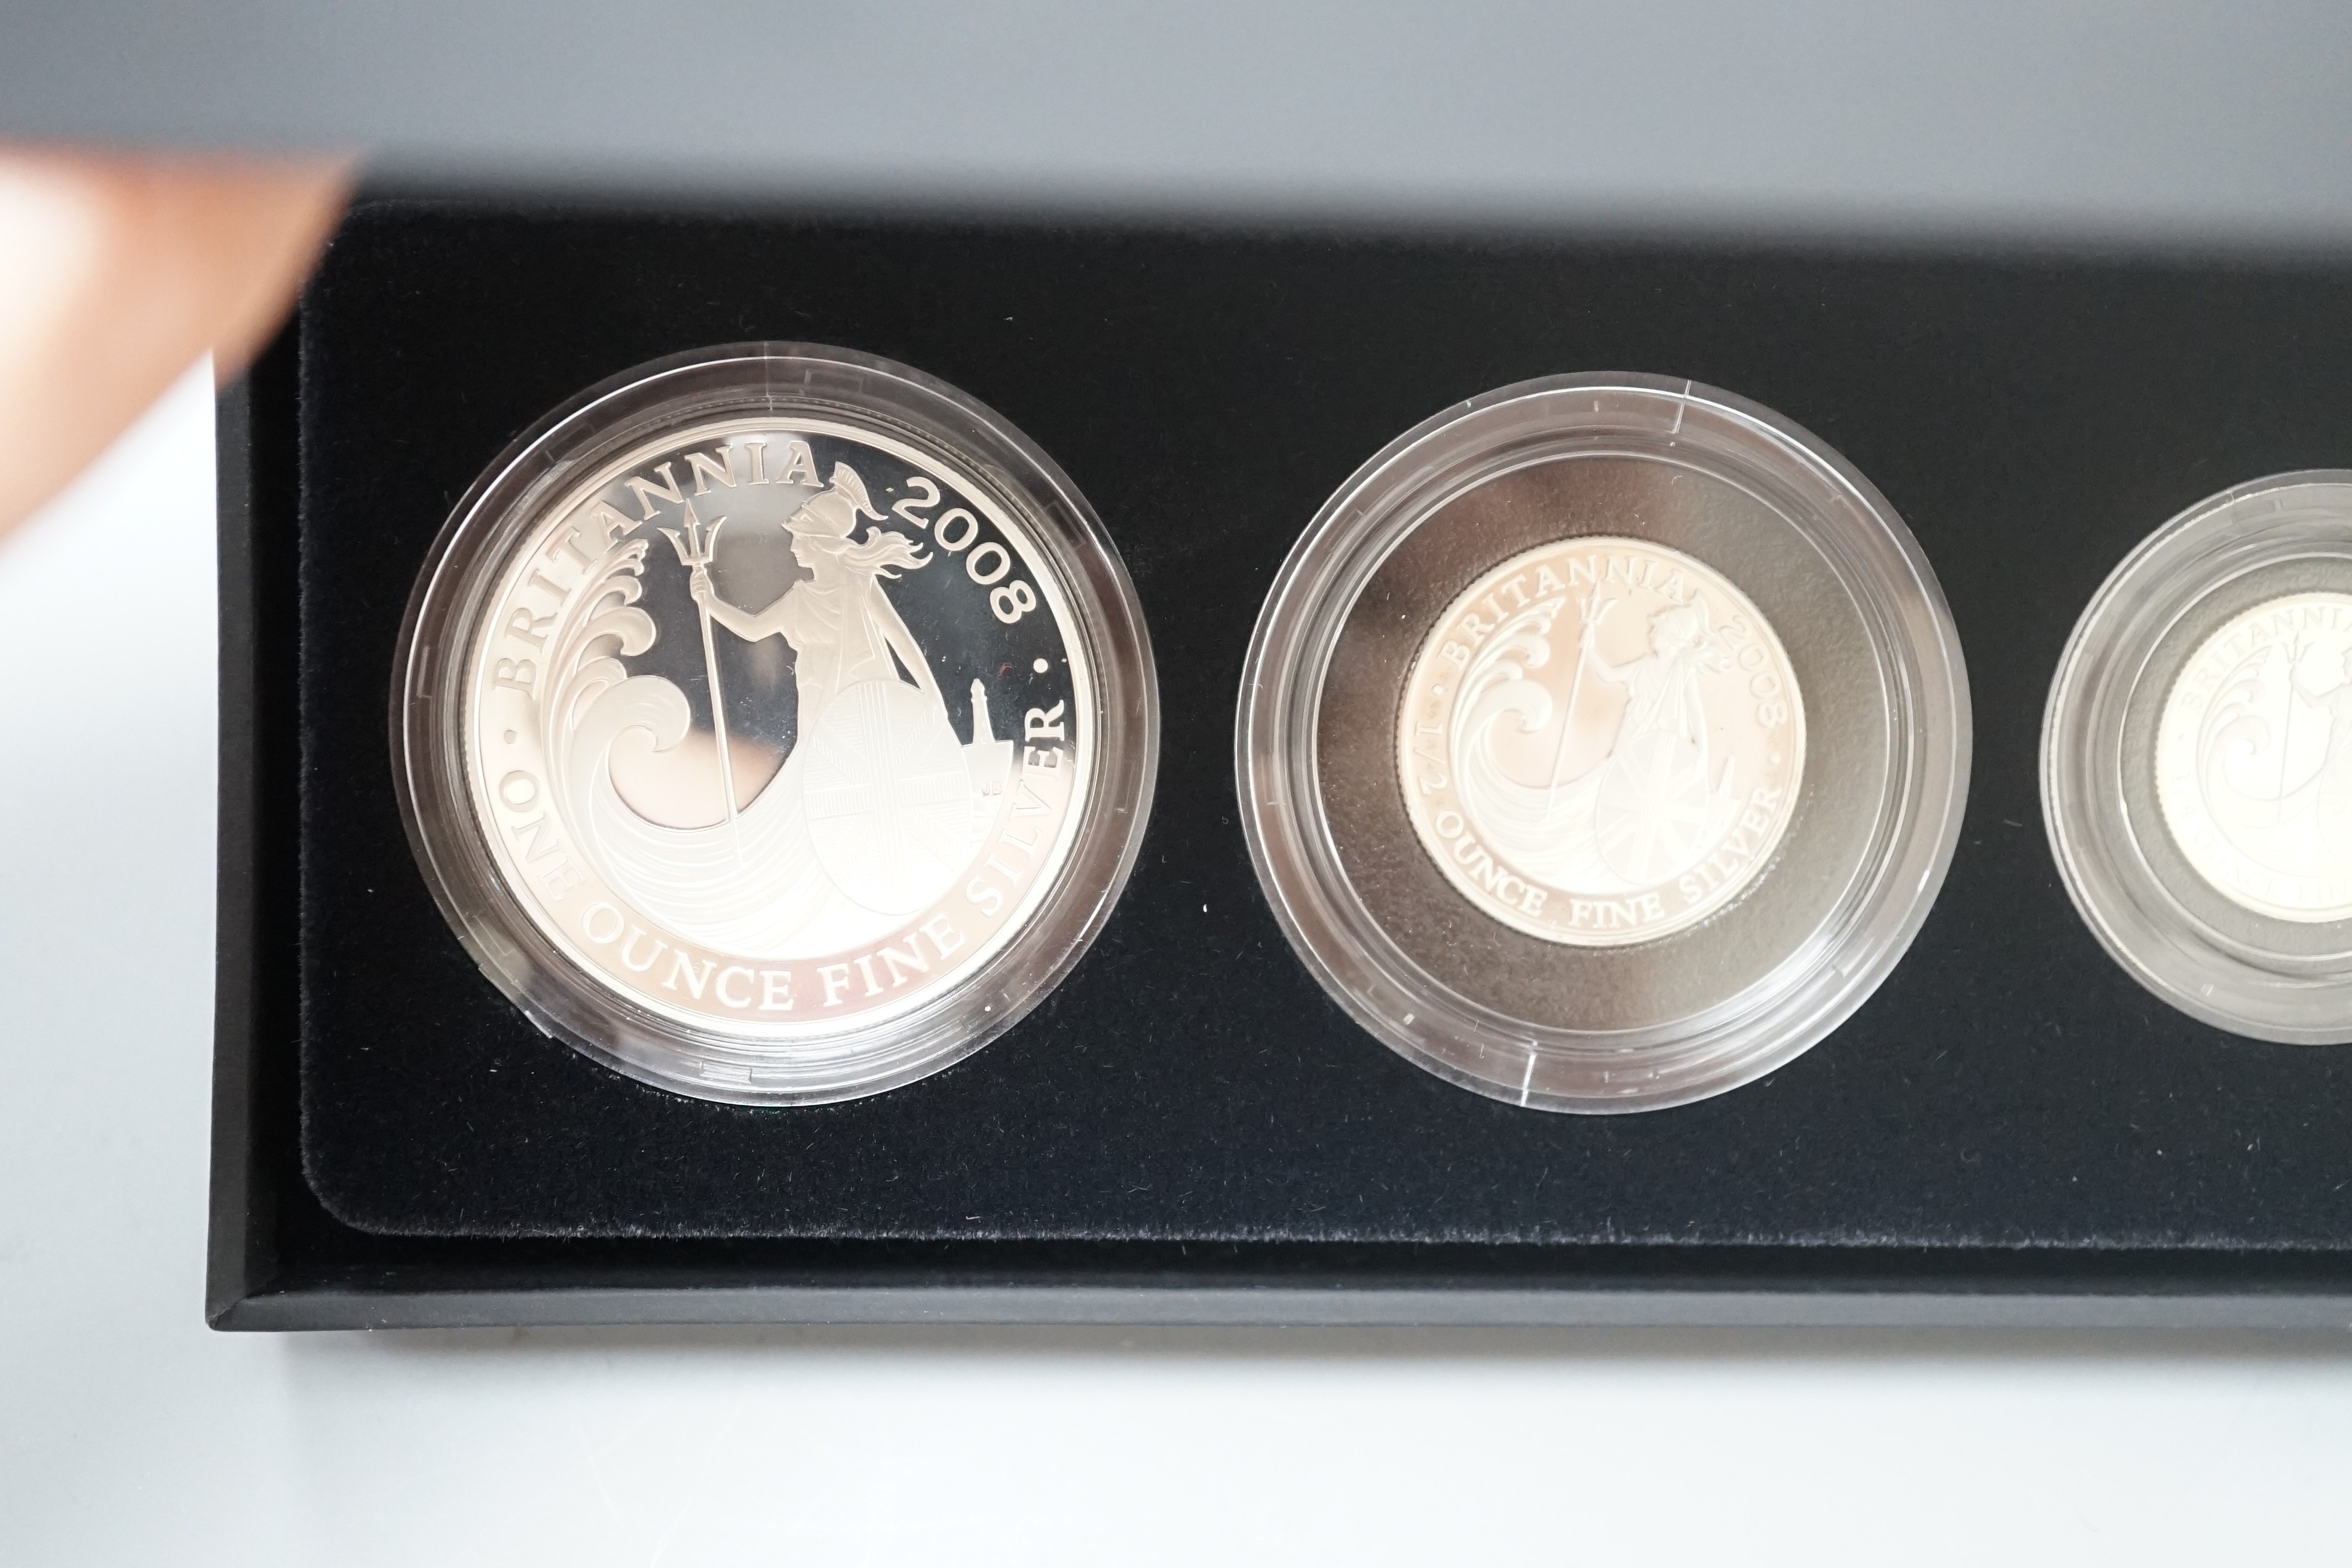 Two cased Royal Mint Britannia silver proof four coin sets, 2005 and 2008, 20p to £2